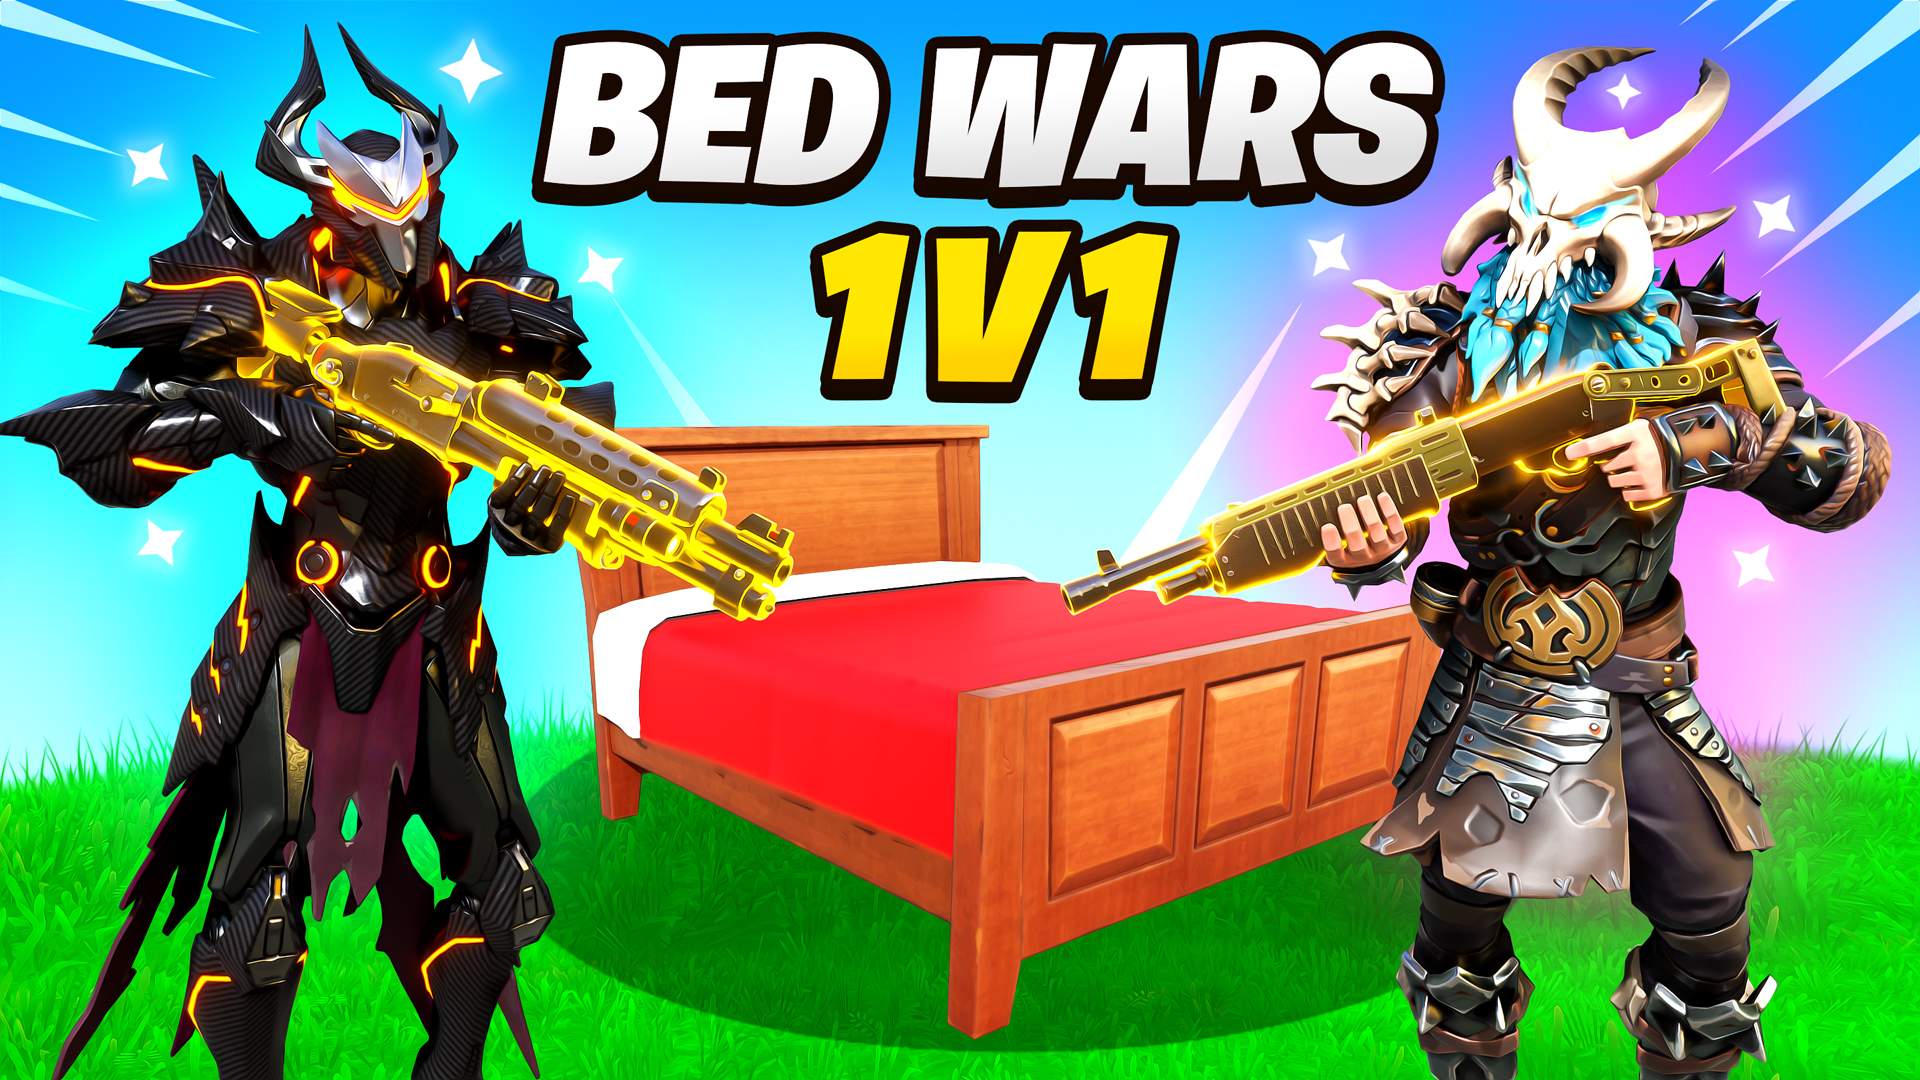 How to play Bed Wars in Fortnite! (PvP mini-game adapted from Minecraft) 